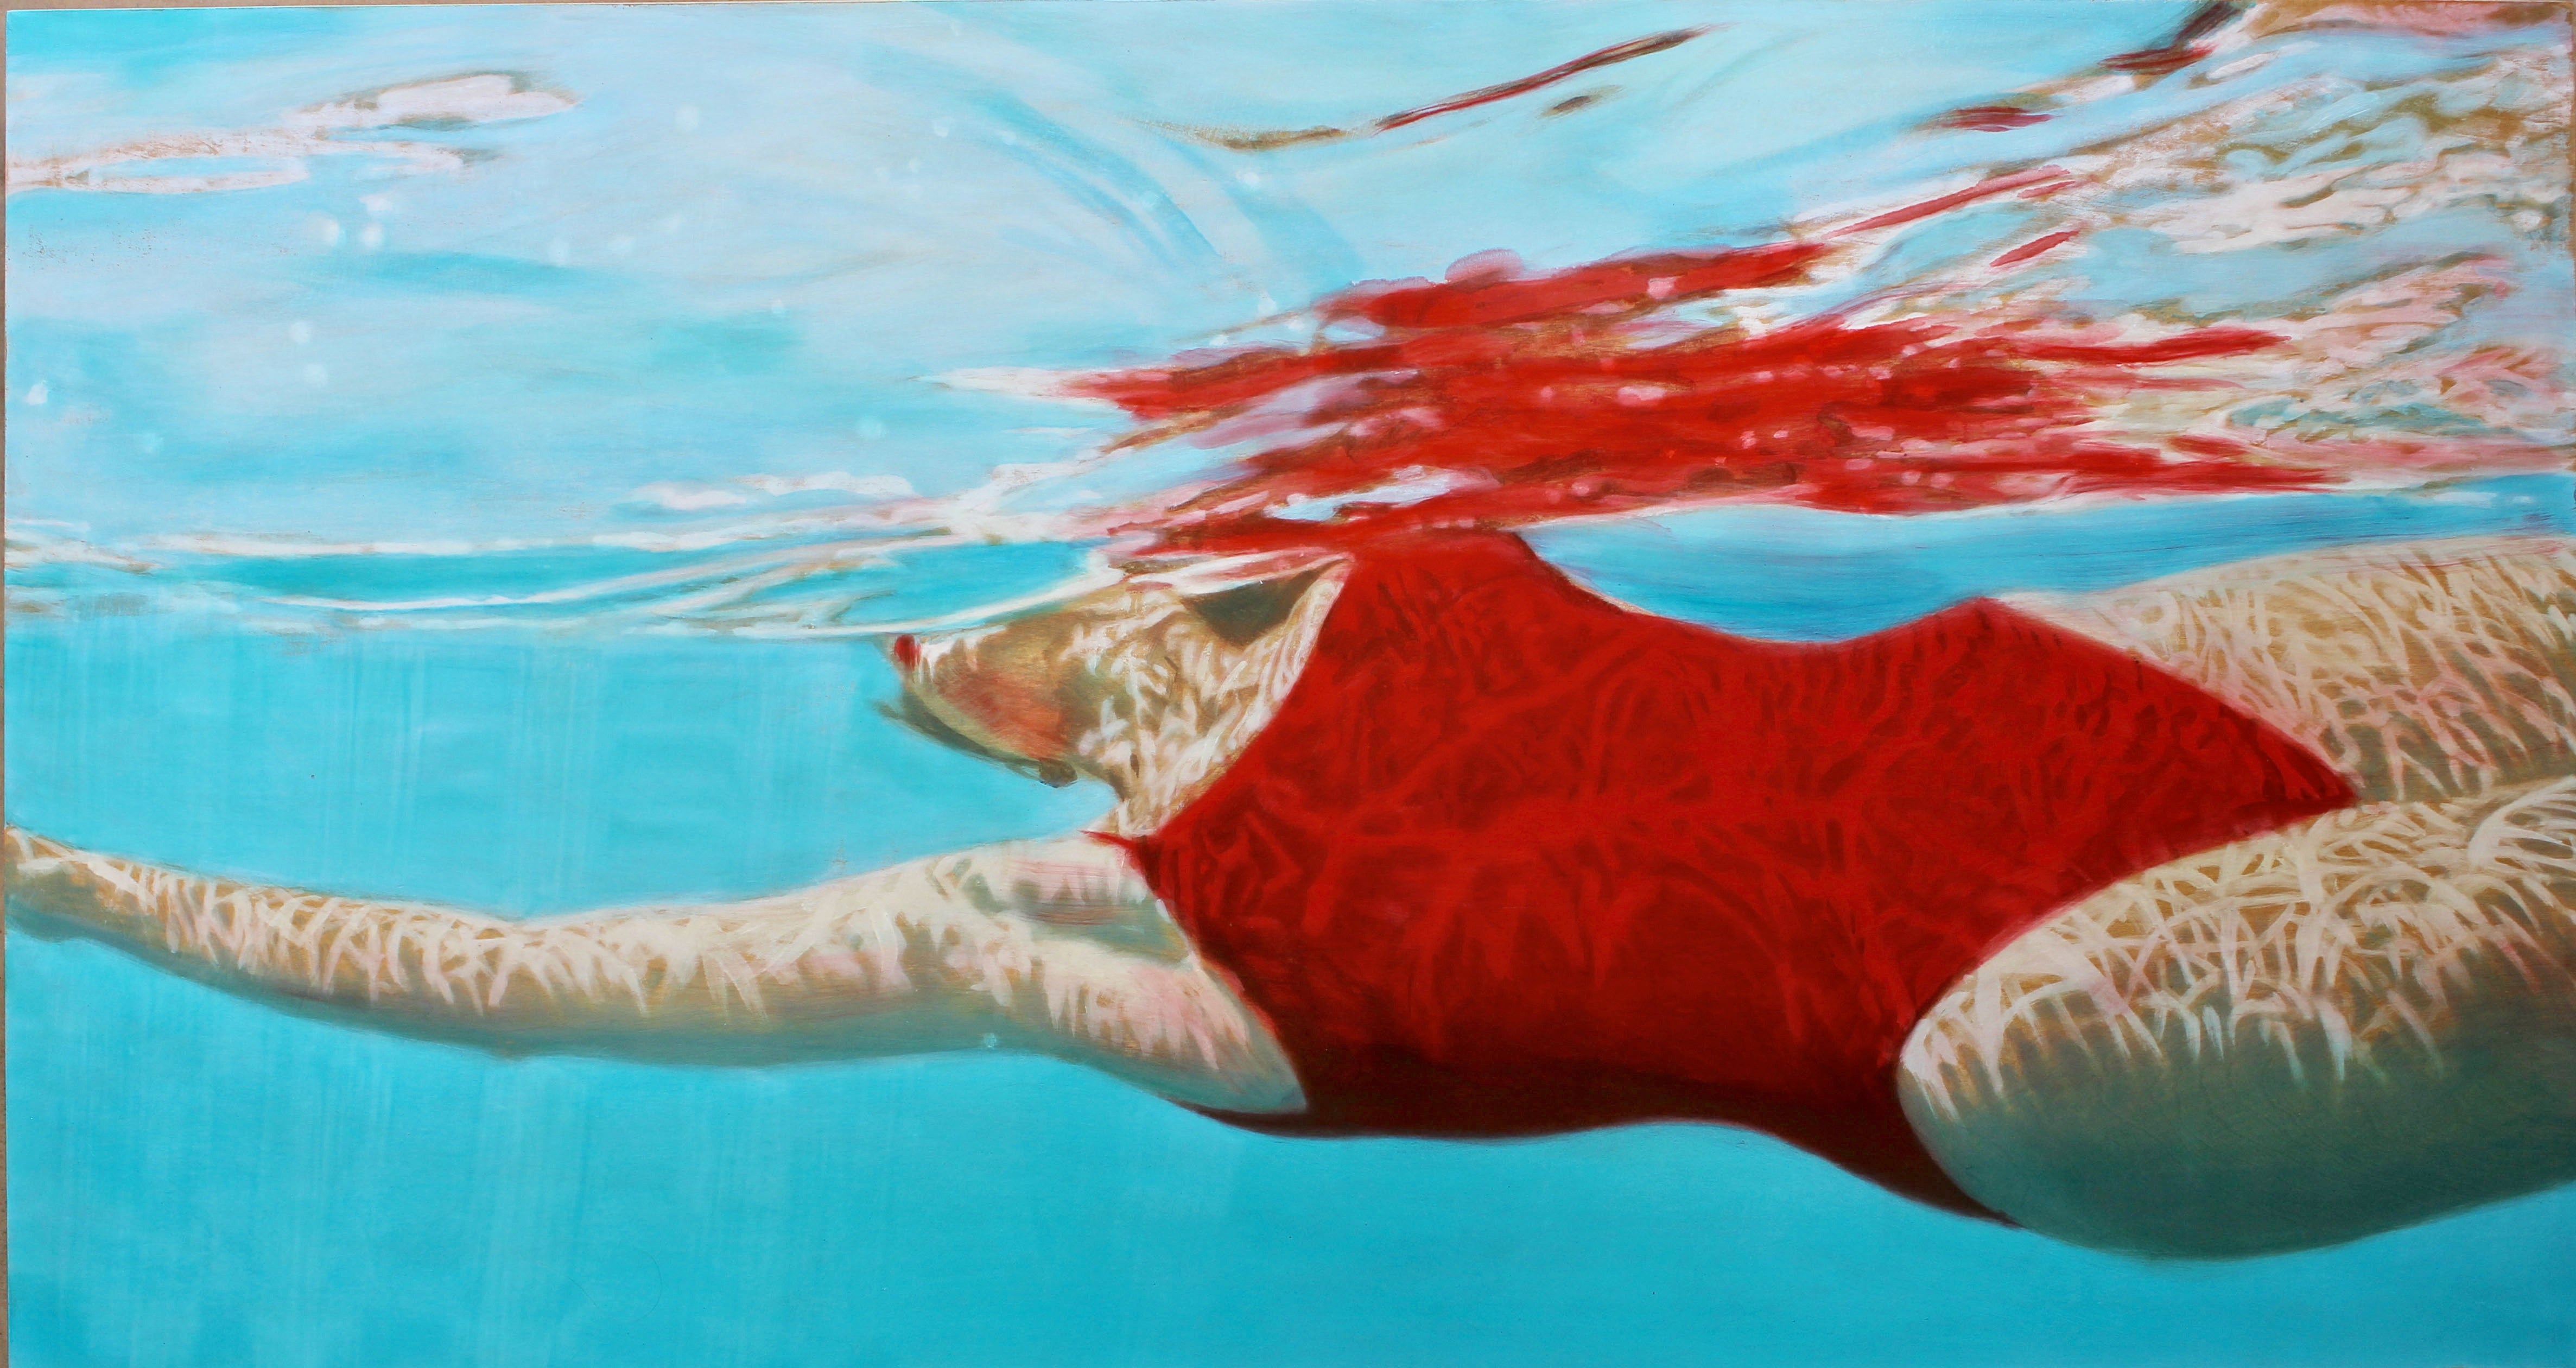 Carol Bennett Relax Oil Painting Of A Swimmer Floating In A Blue Pool For Sale At Stdibs